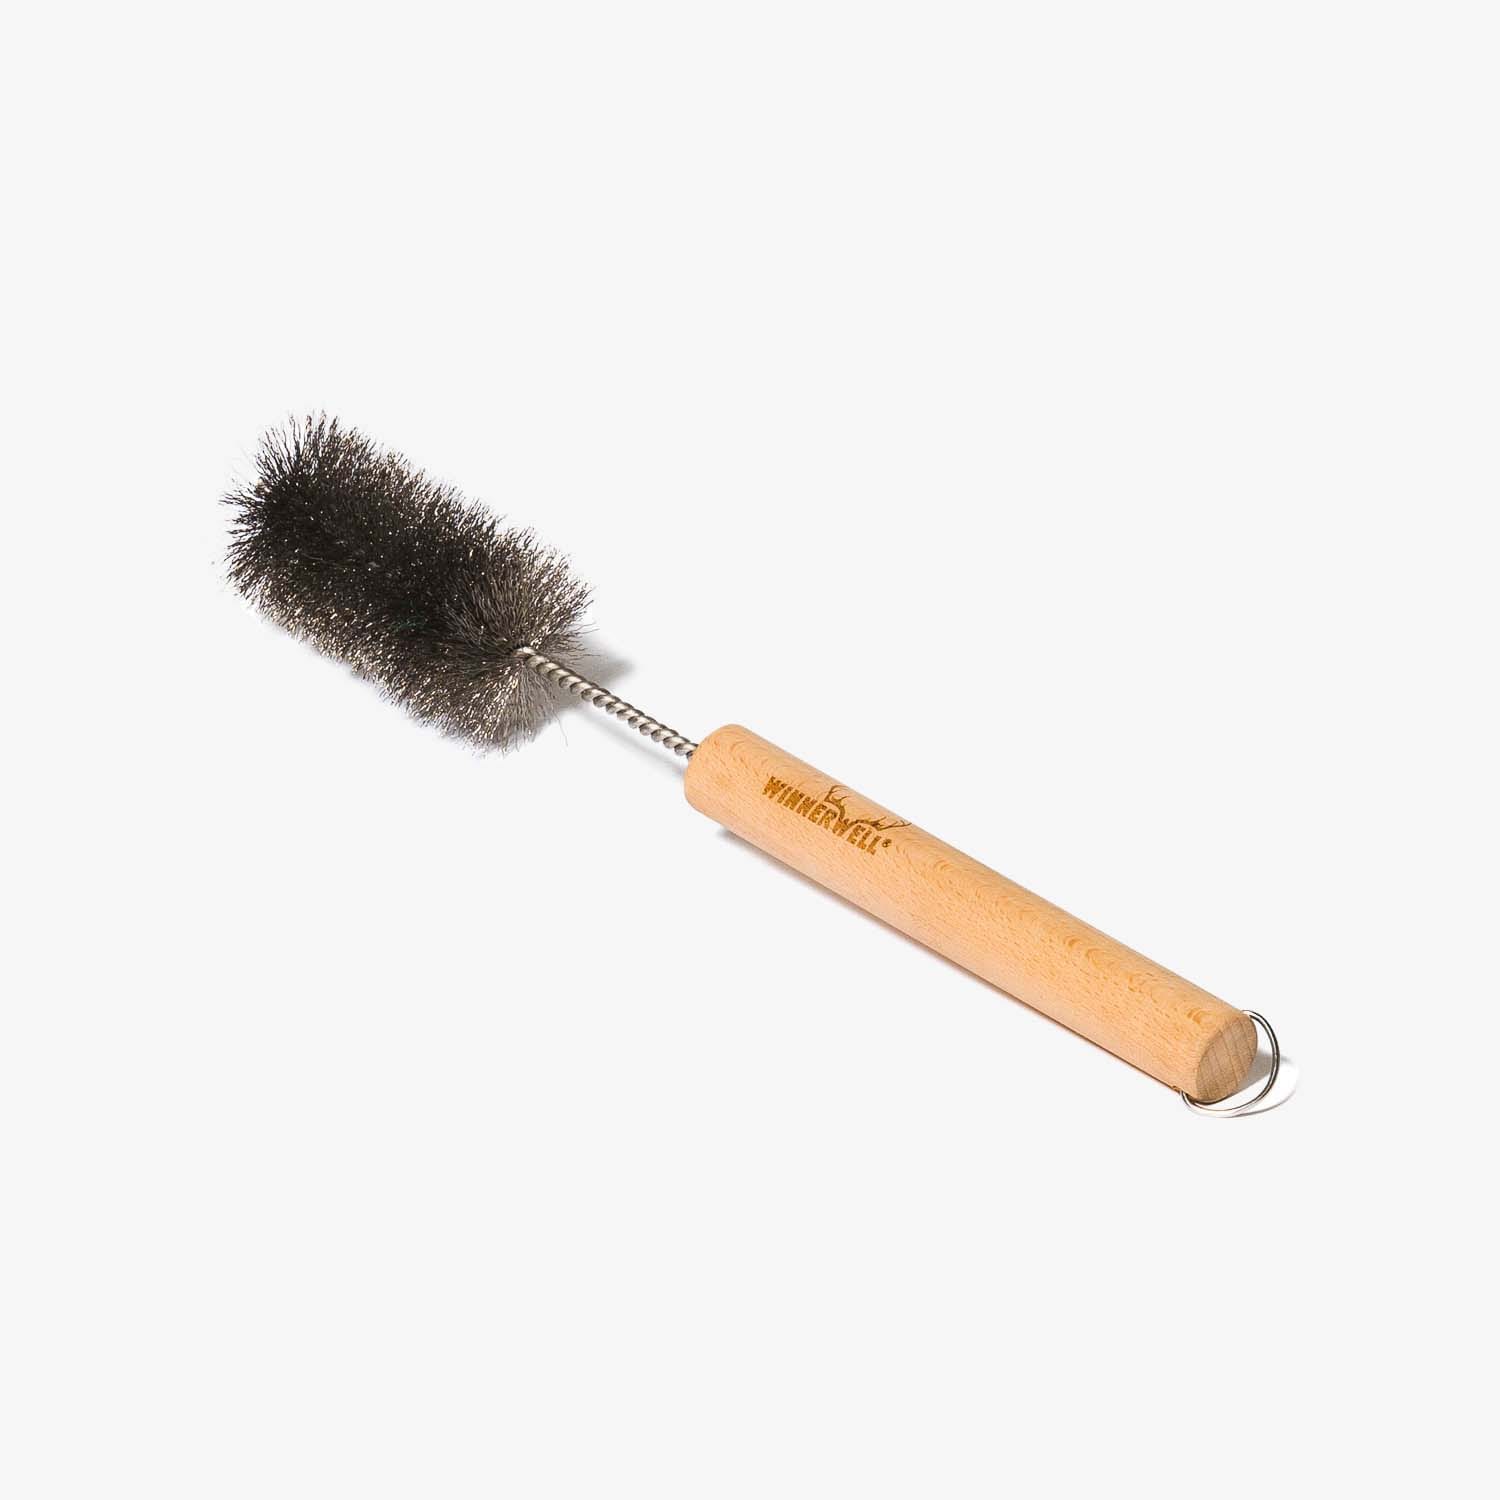 Winnerwell Pipe Brush 2.5 inch | 2.5 inch Diameter Wire Brush for Cleaning Chimney Pipes of Medium Size Stoves